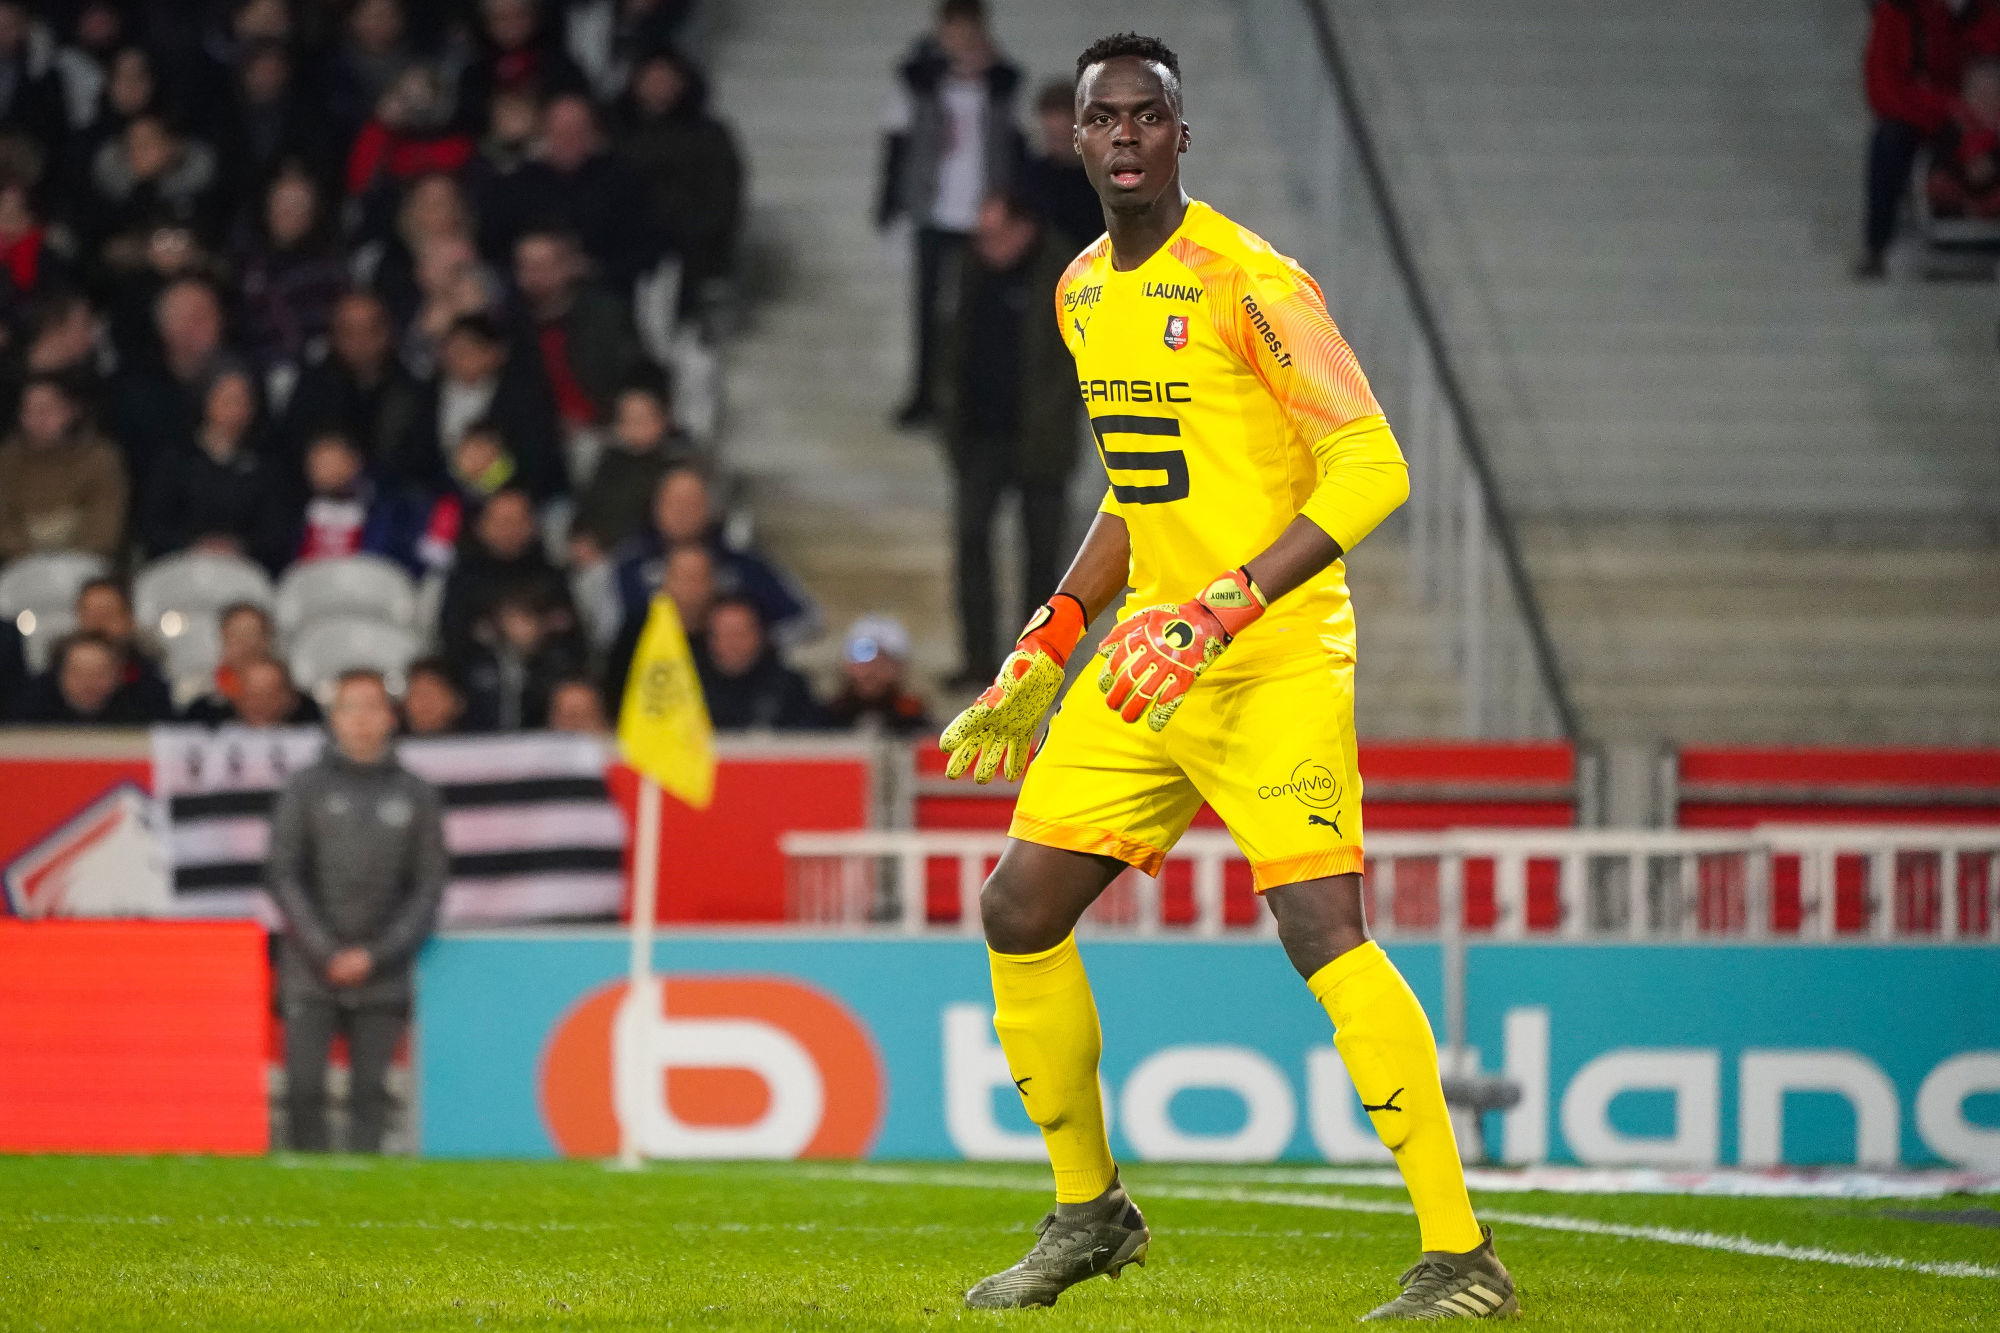 Edouard MENDY of Stade Rennais during the Ligue 1 match between Lille OSC and Rennes at Stade Pierre Mauroy on February 4, 2020 in Lille, France. (Photo by Pierre Costabadie/Icon Sport) - Edouard MENDY - Stade Pierre Mauroy - Lille (France)